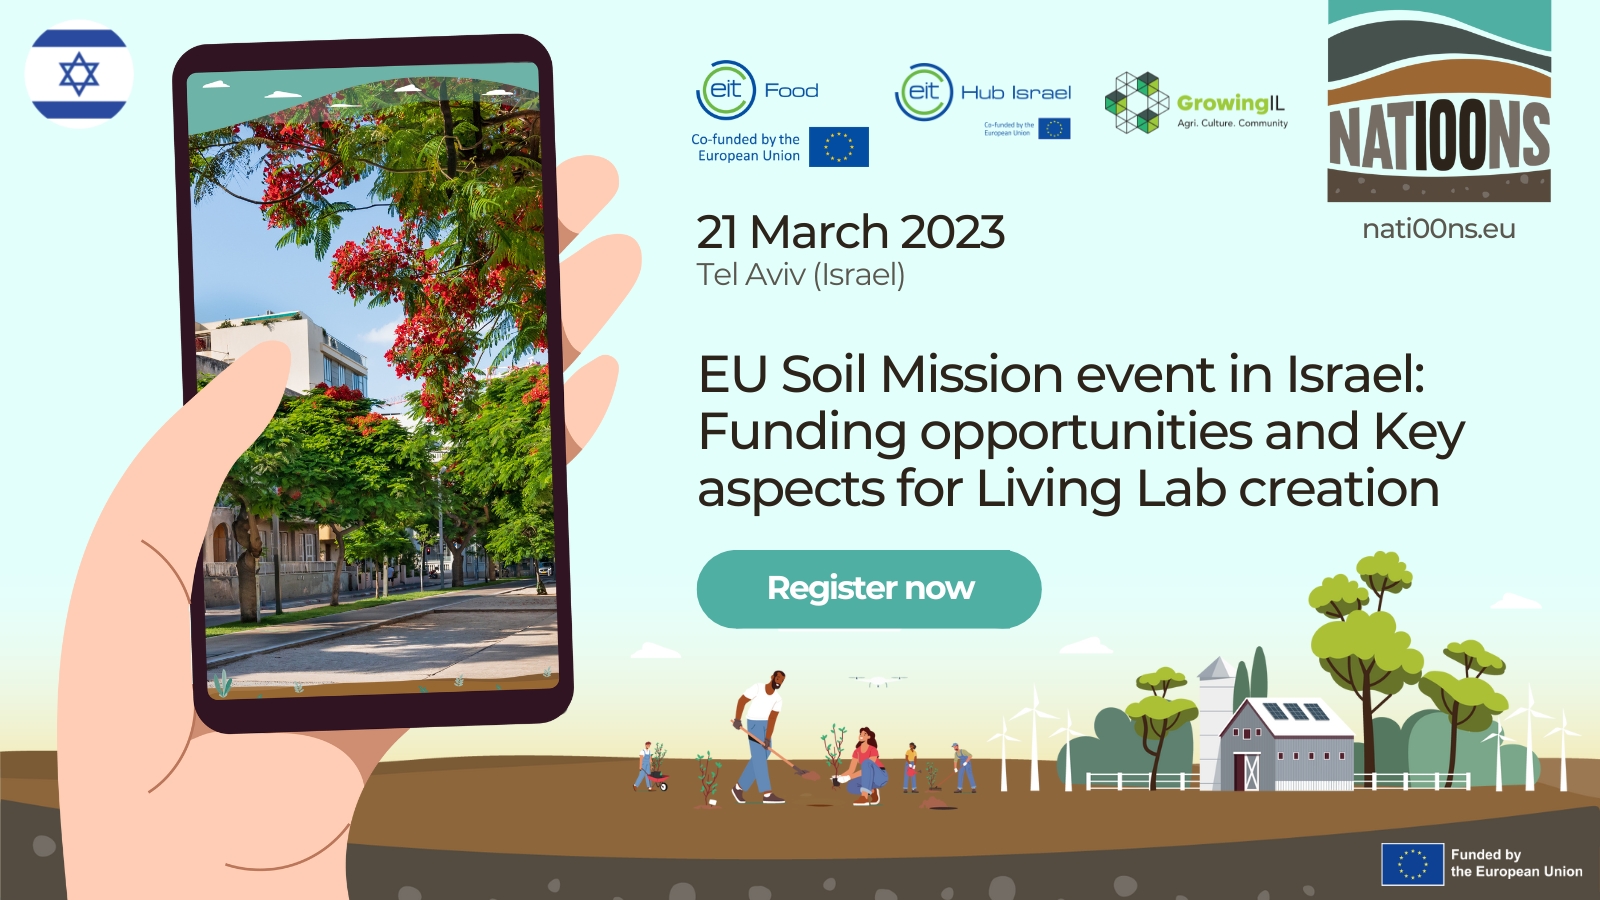 EU Soil Mission event in Israel: Funding opportunities and Key aspects for Living Lab creation